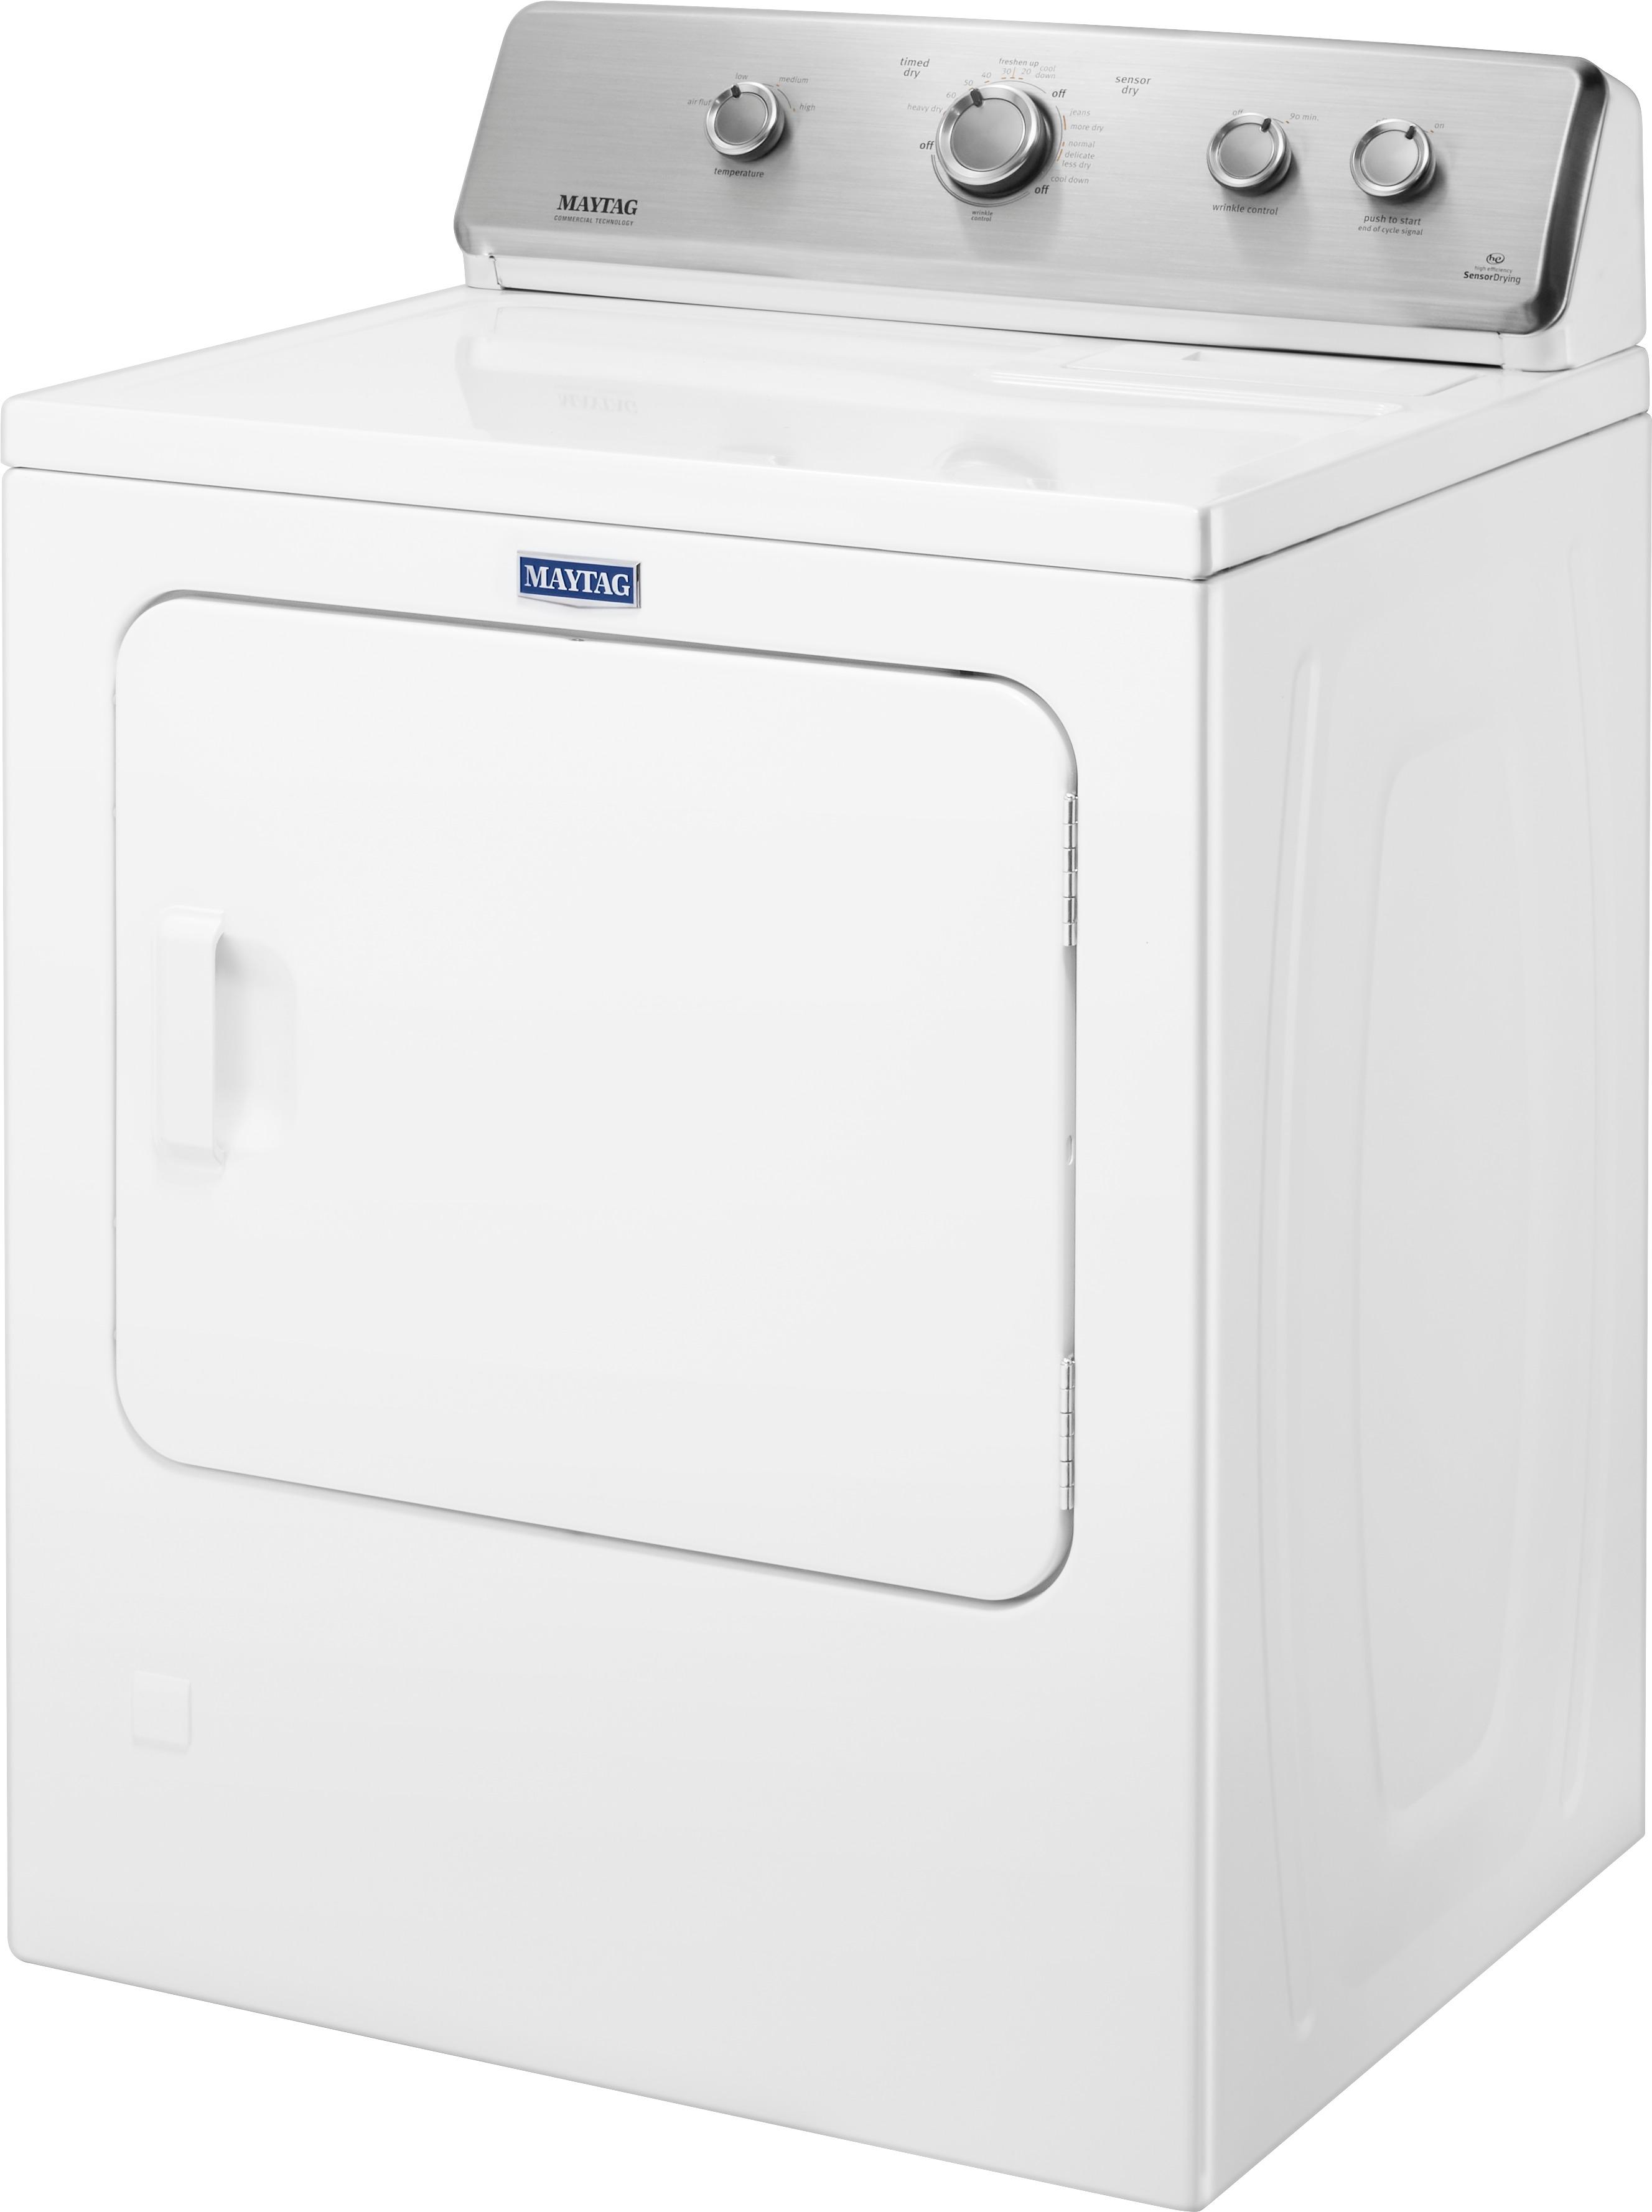 Left View: Maytag - 7 Cu. Ft. Gas Dryer with Wrinkle Control Cycle - White